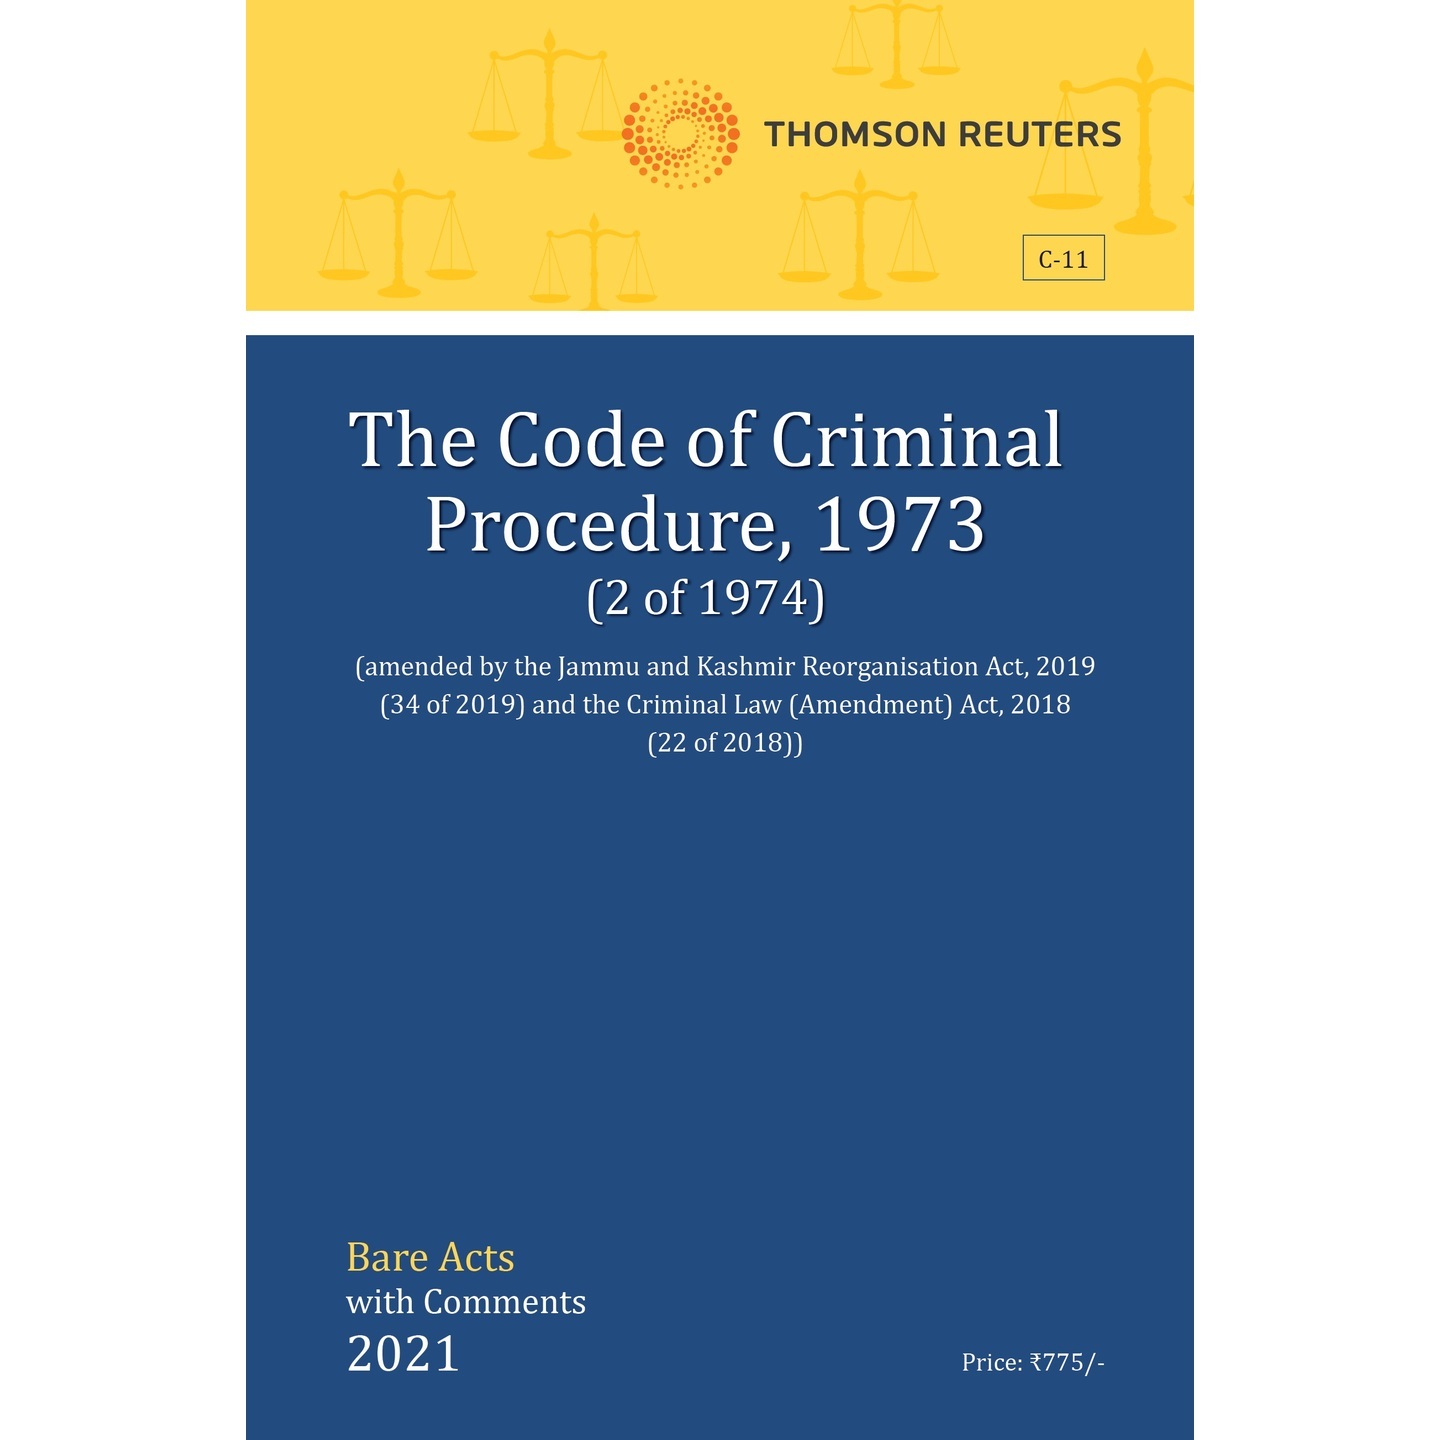 The Code of Criminal Procedure, 1973 (Bare Acts with Comments 2021)